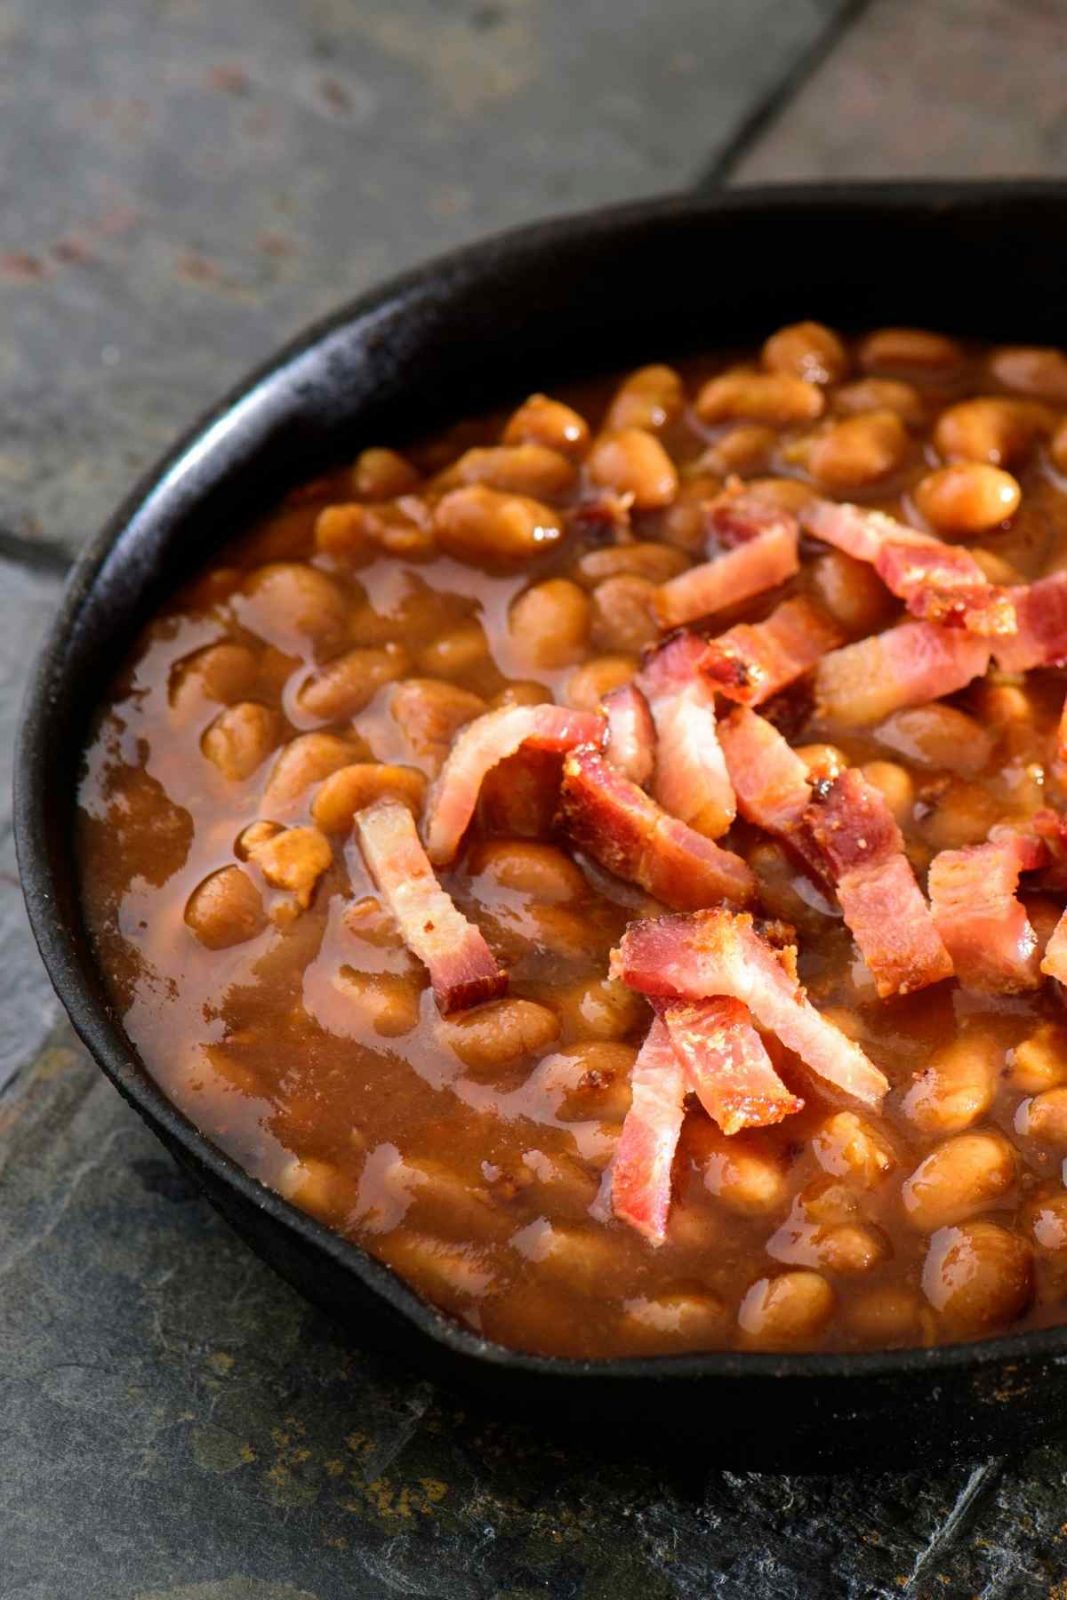 This simple stovetop dish is set to become your favorite Pork and Beans recipe! Full of delicious sweet and smokey flavors, it's the ideal side to serve at your next backyard BBQ!